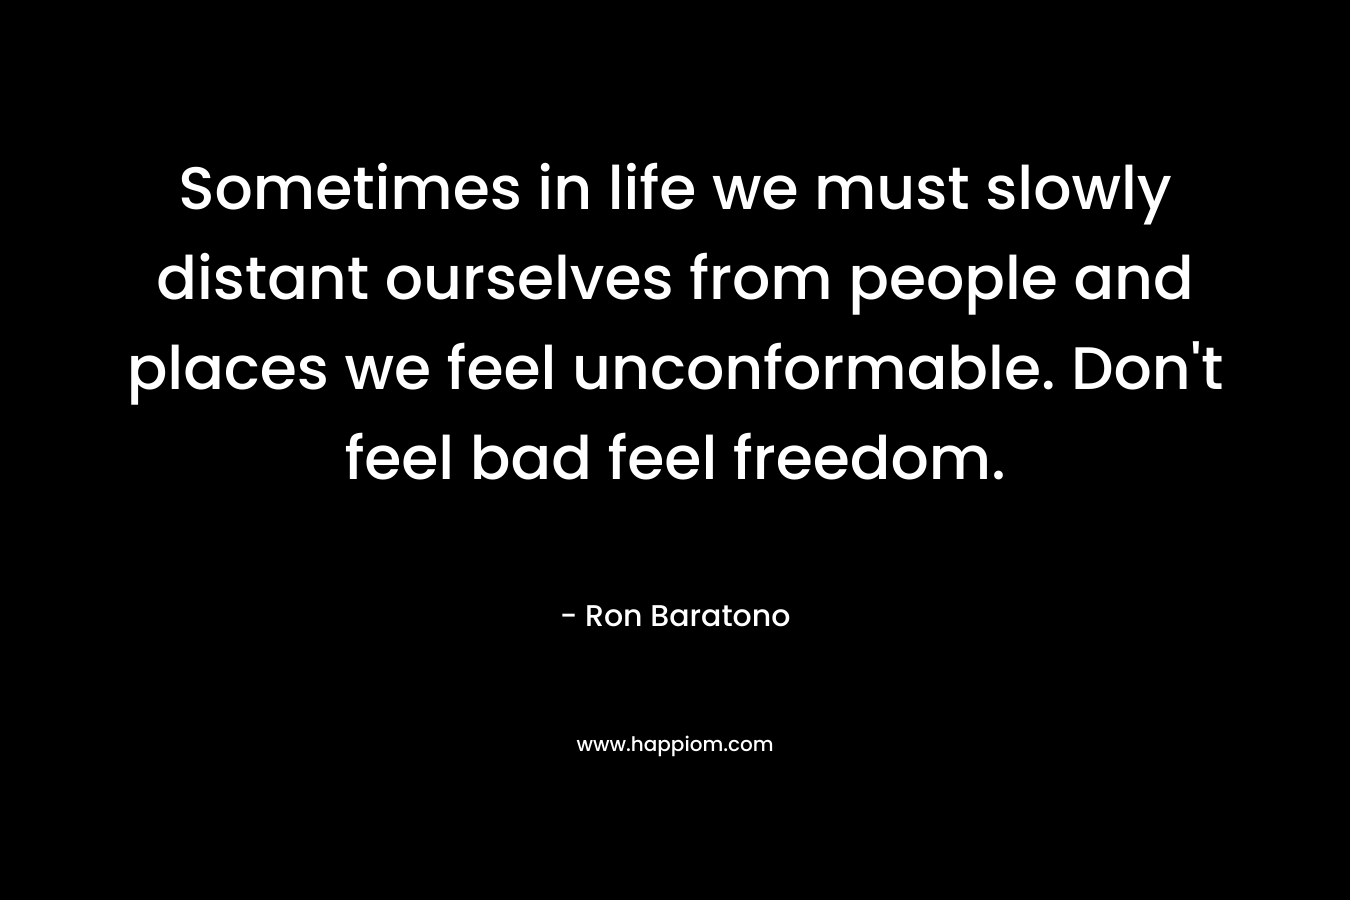 Sometimes in life we must slowly distant ourselves from people and places we feel unconformable. Don't feel bad feel freedom.